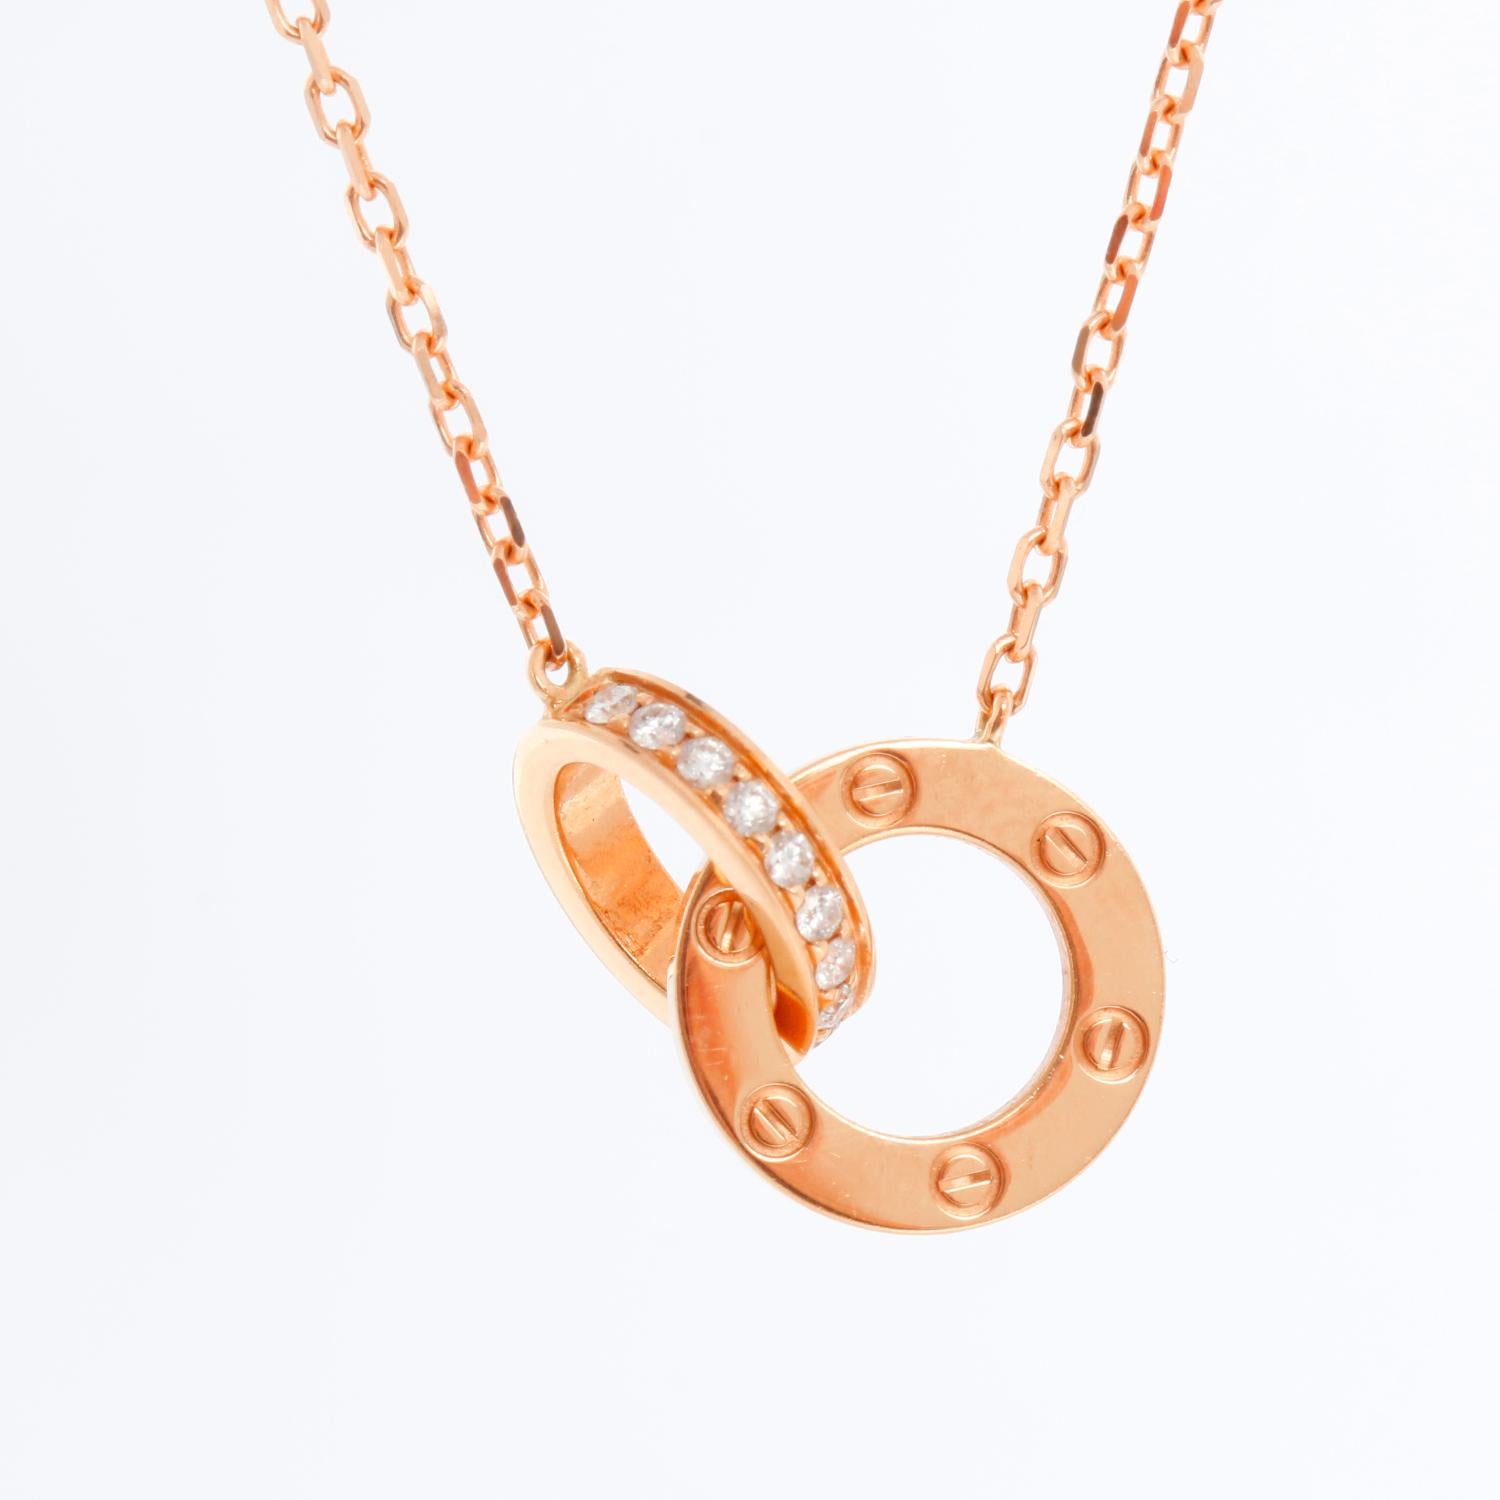 Cartier Love Rose Gold Diamond Necklace Ref. CRB7224528 - 18K Rose gold set with 48 brilliant cut diamonds totaling .30 carats . Chain length 16 inches. Pre-owned with Cartier box and papers. Papers dated 2022.